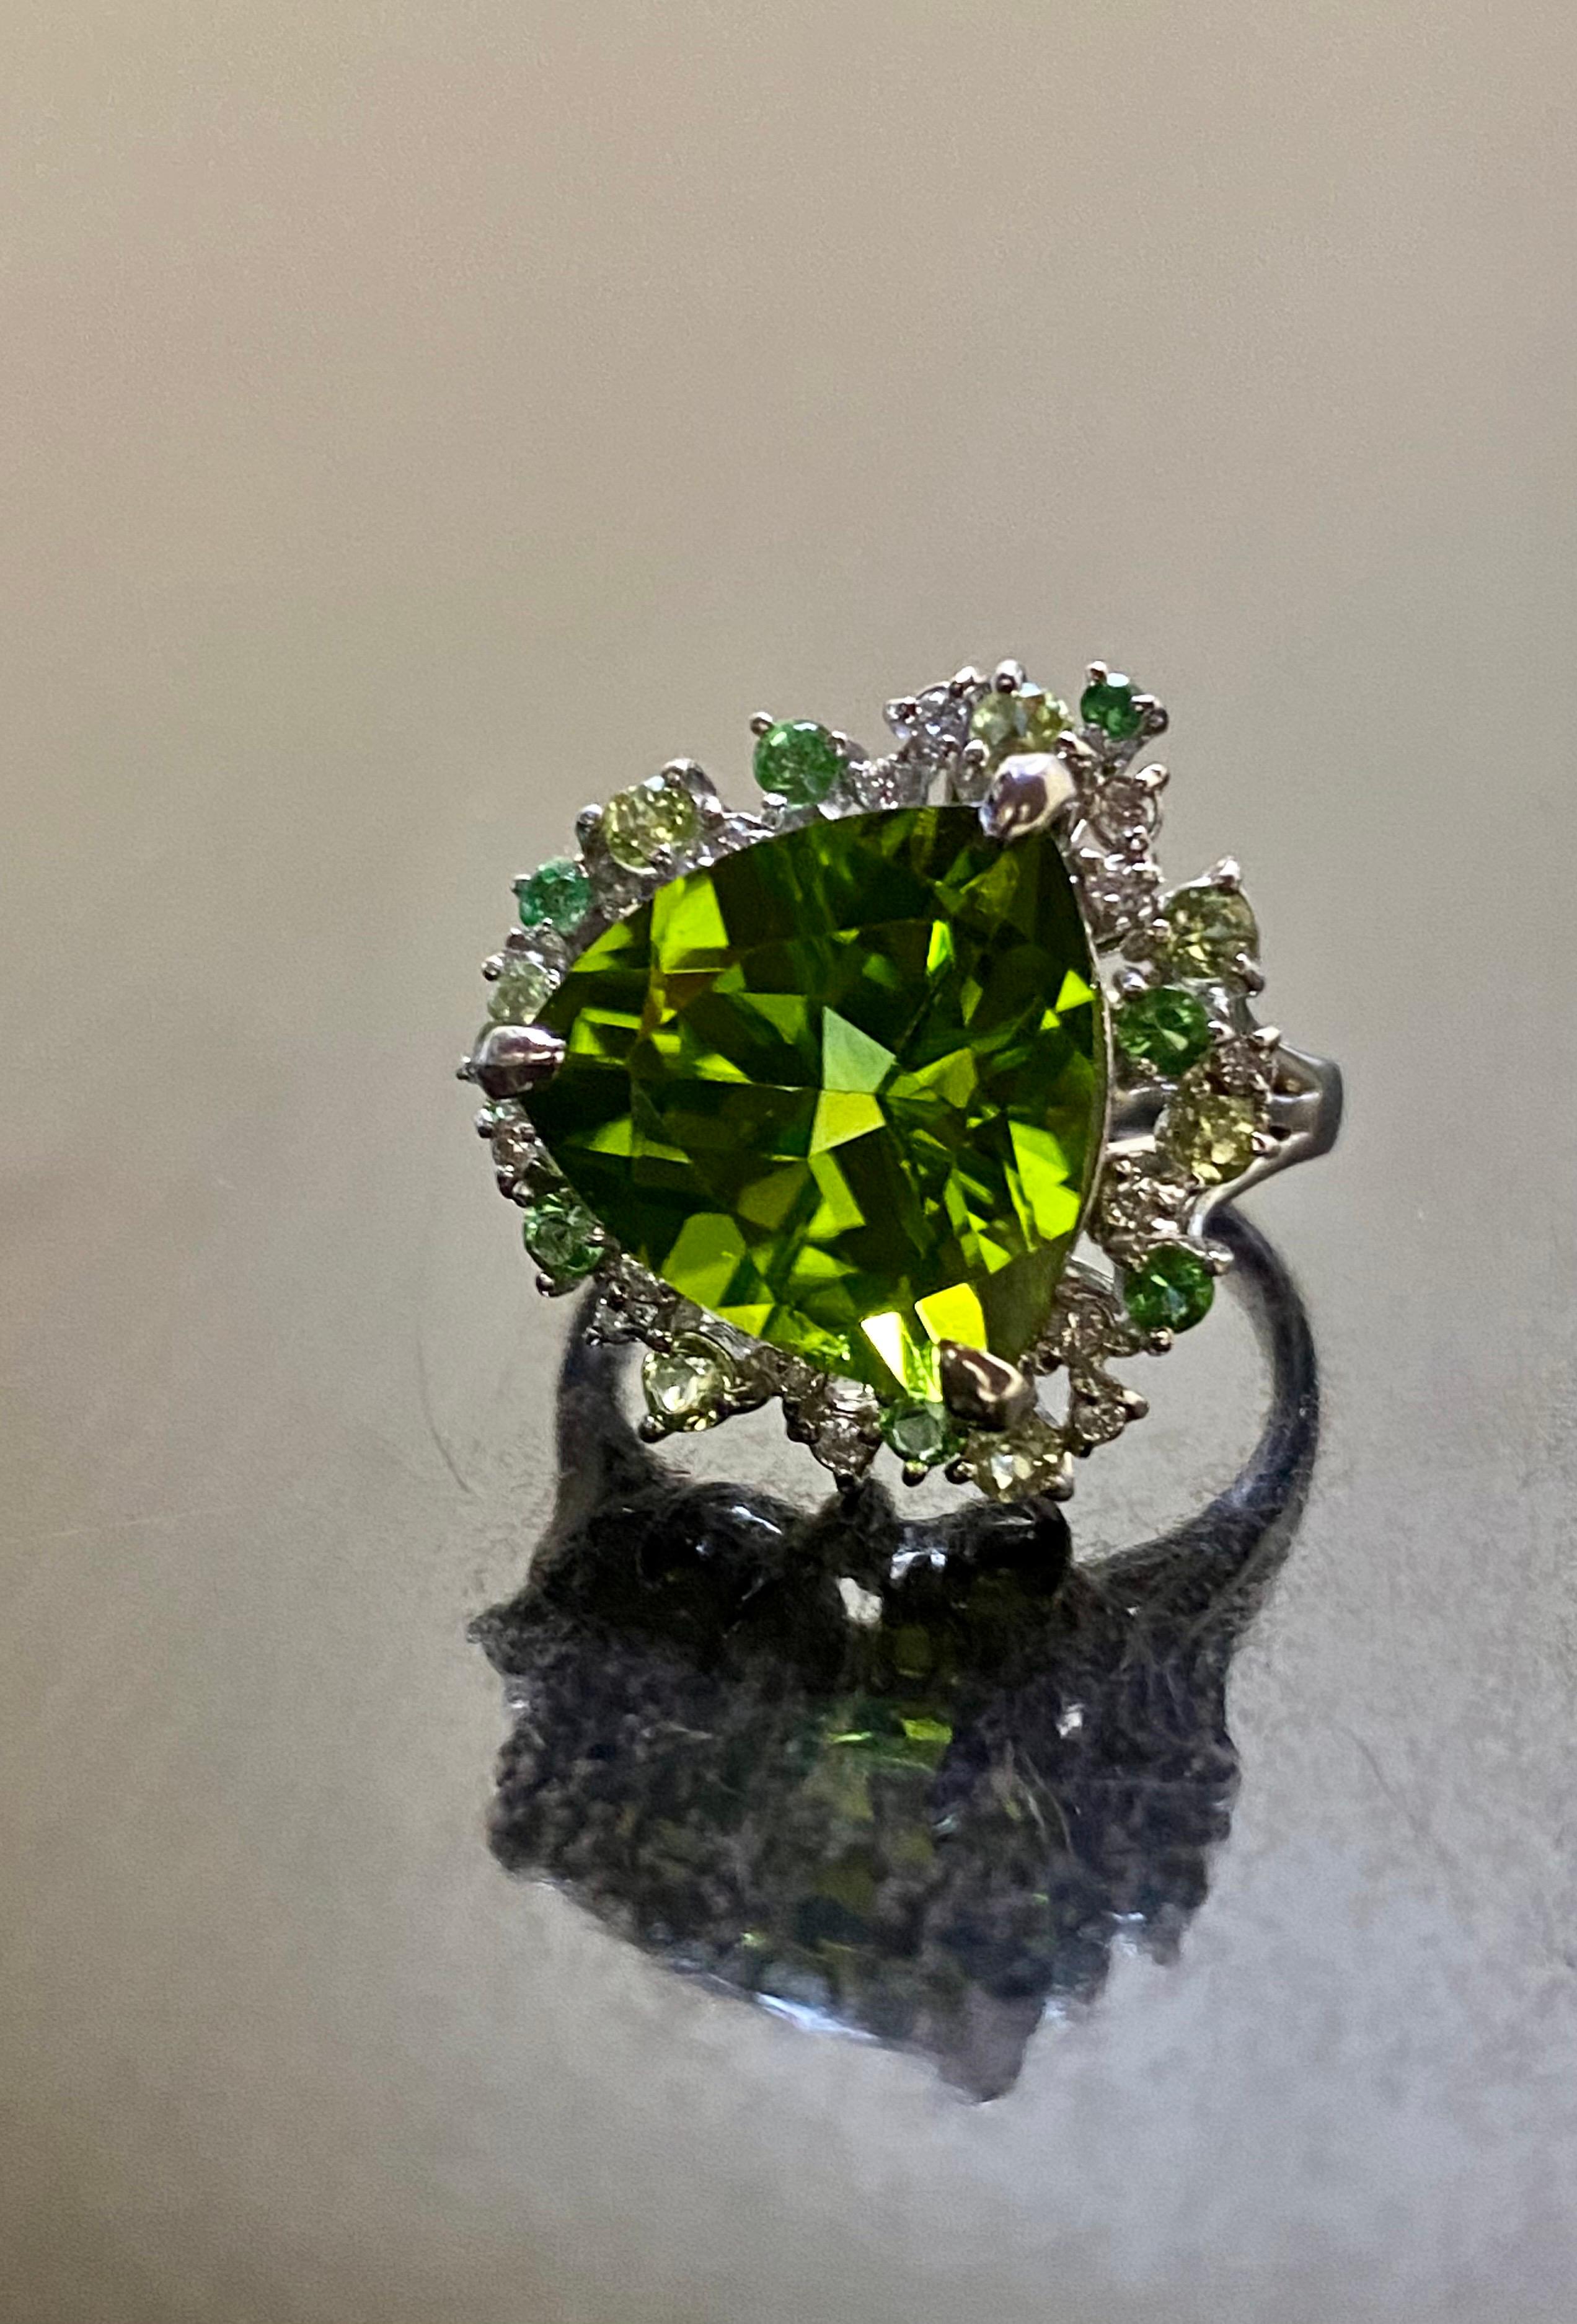 DeKara Designs Collection

Our latest design! An elegant and lustrous and unique amazing trillion cut peridot surrounded beautifully by diamonds and round peridots in a halo setting.

Metal- 90% Platinum, 10% Iridium.

Stones- Genuine Trillion